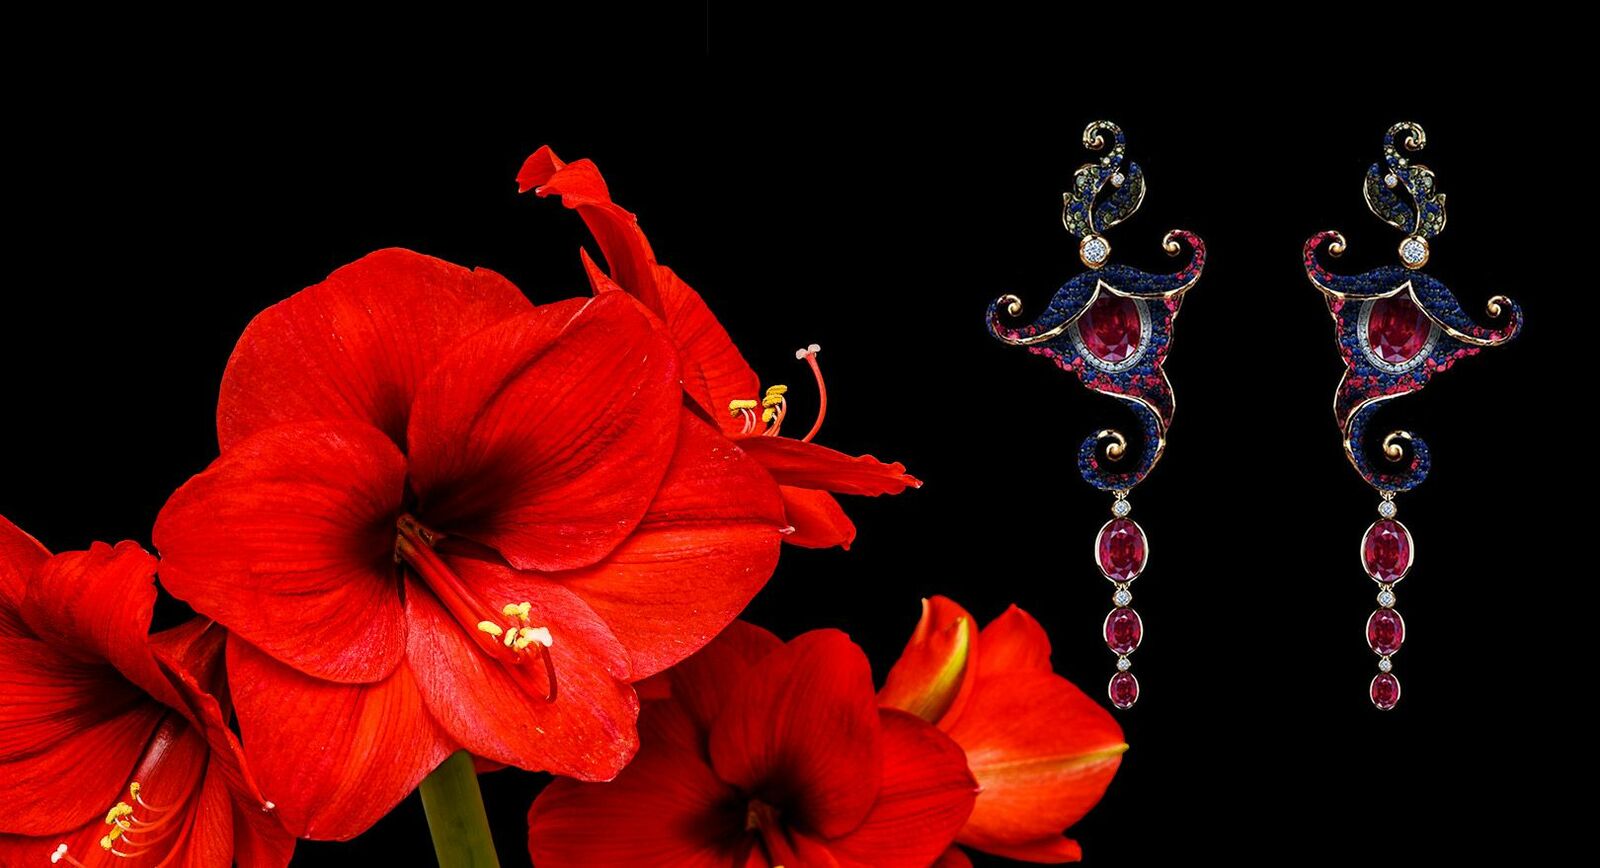 Jewellery Theatre Amaryllis Set – The Star Of The Flower Collection